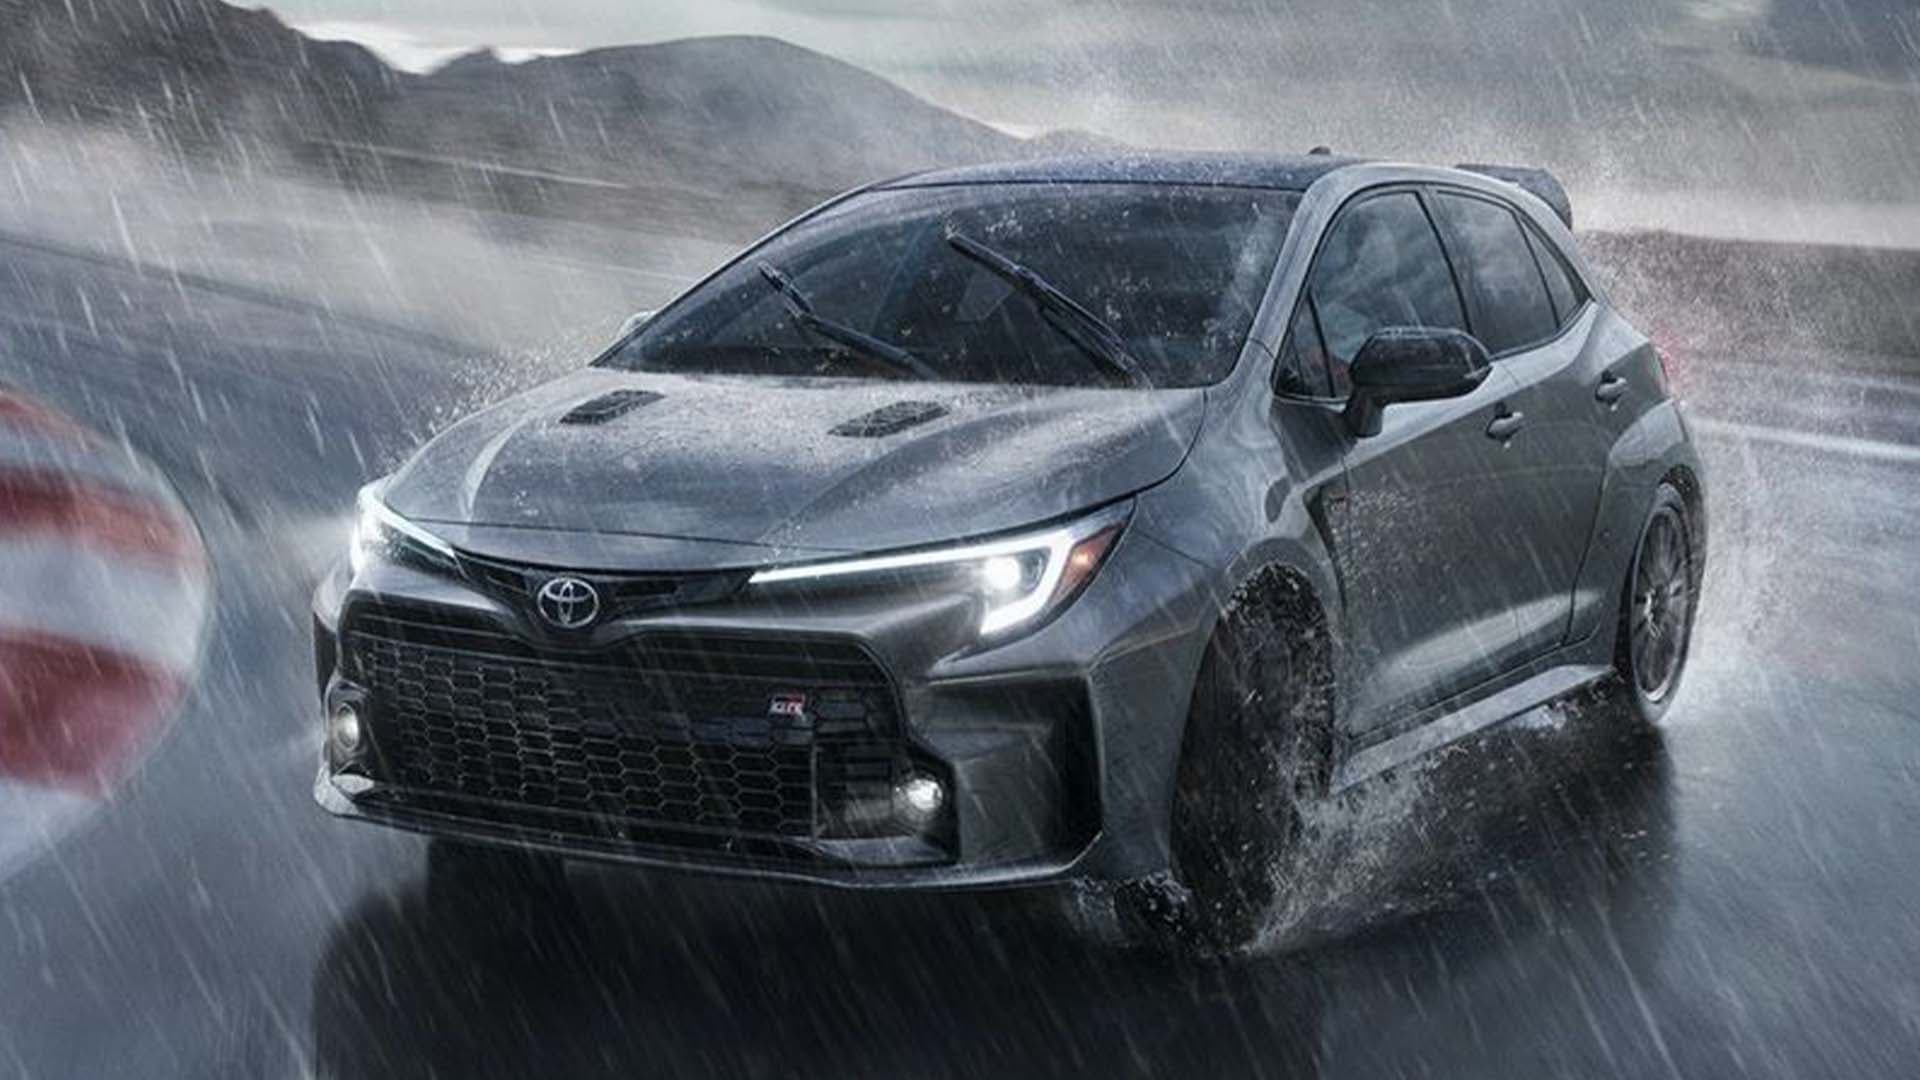 2023 Toyota GR Corolla Pics, Details Leak Before Tonight’s Reveal. Here’s What to Know